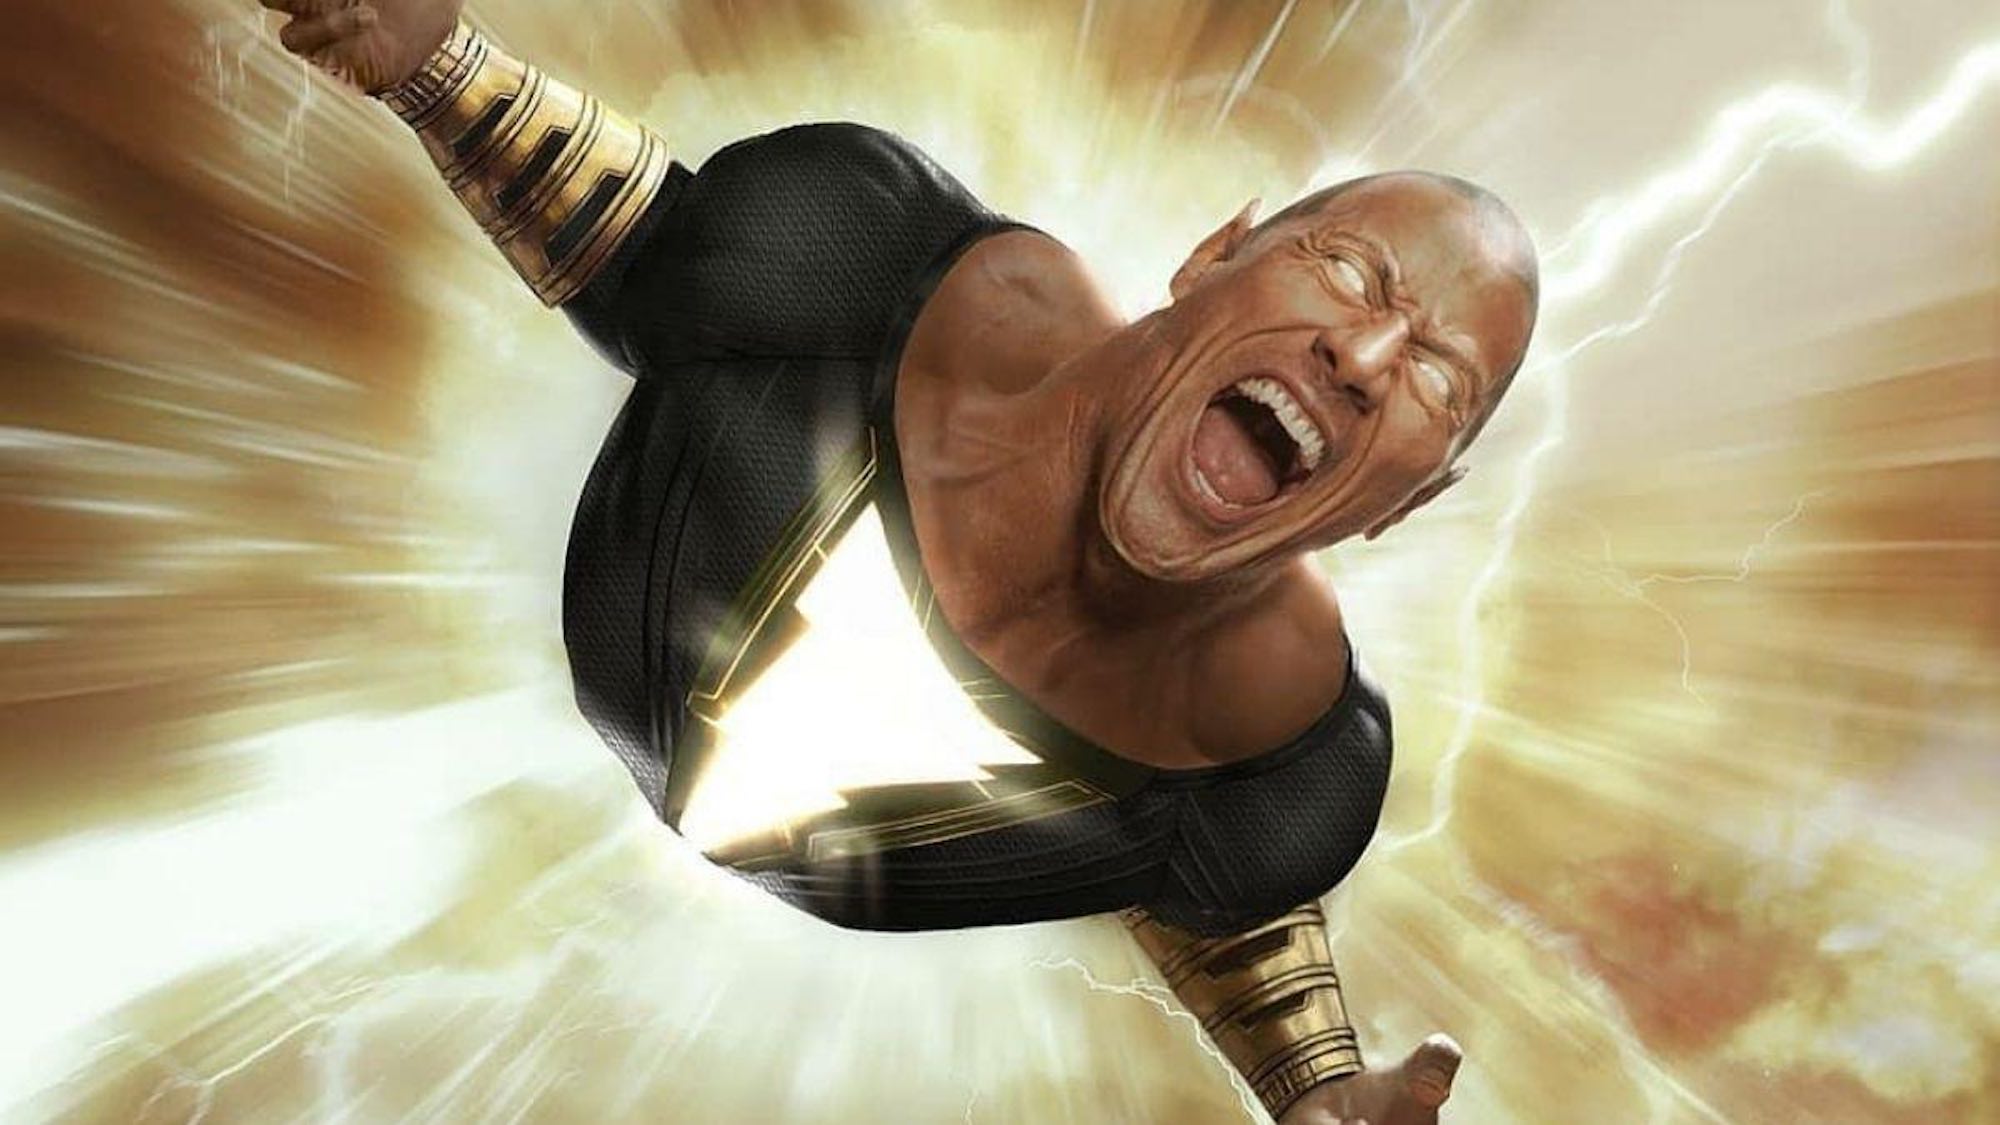 'Black Adam': Dive behind the scenes with Dwayne "The Rock" Johnson